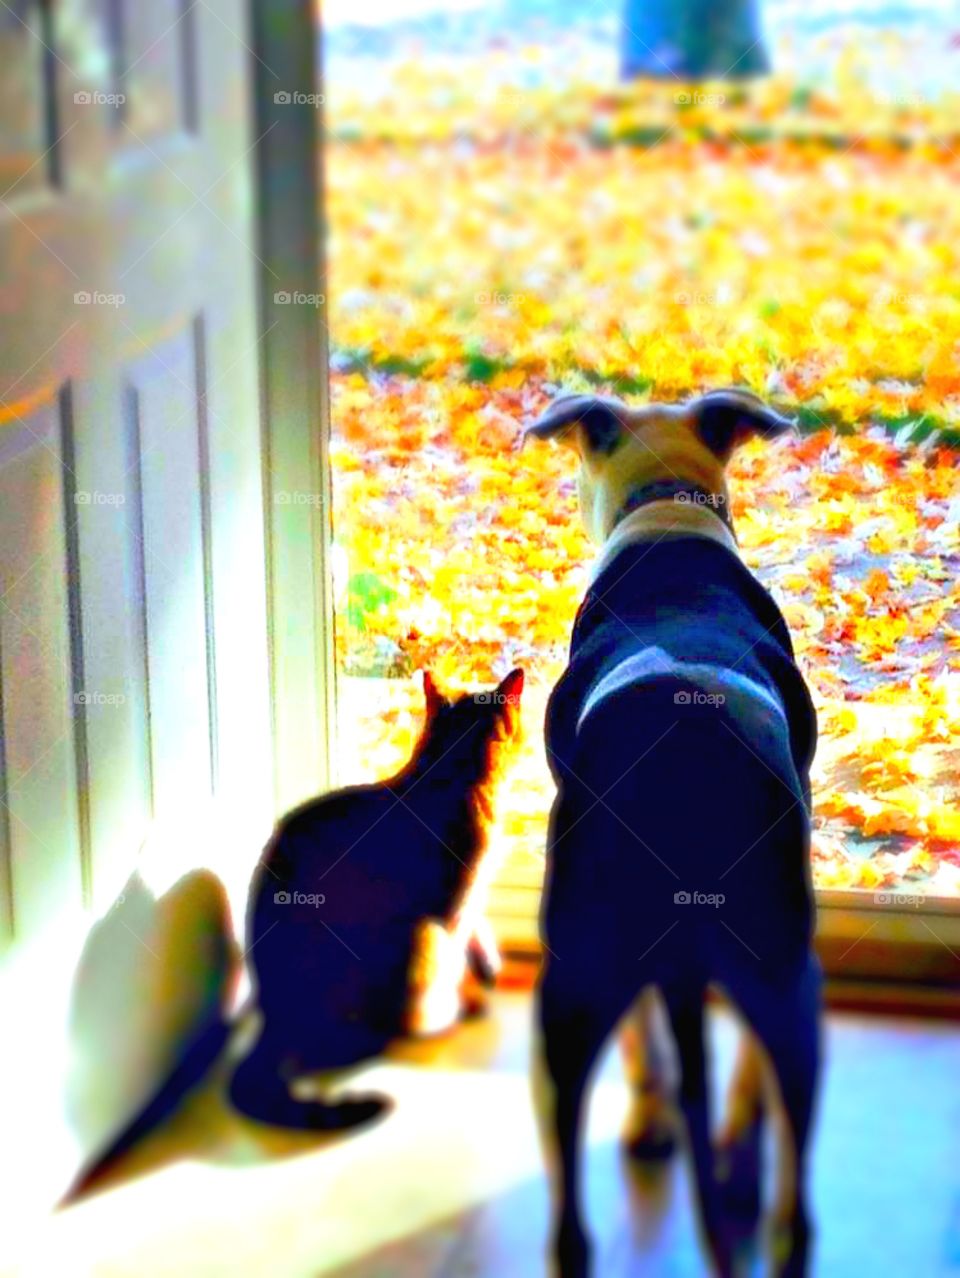 Cat and dog at door looking outside at fall leaves